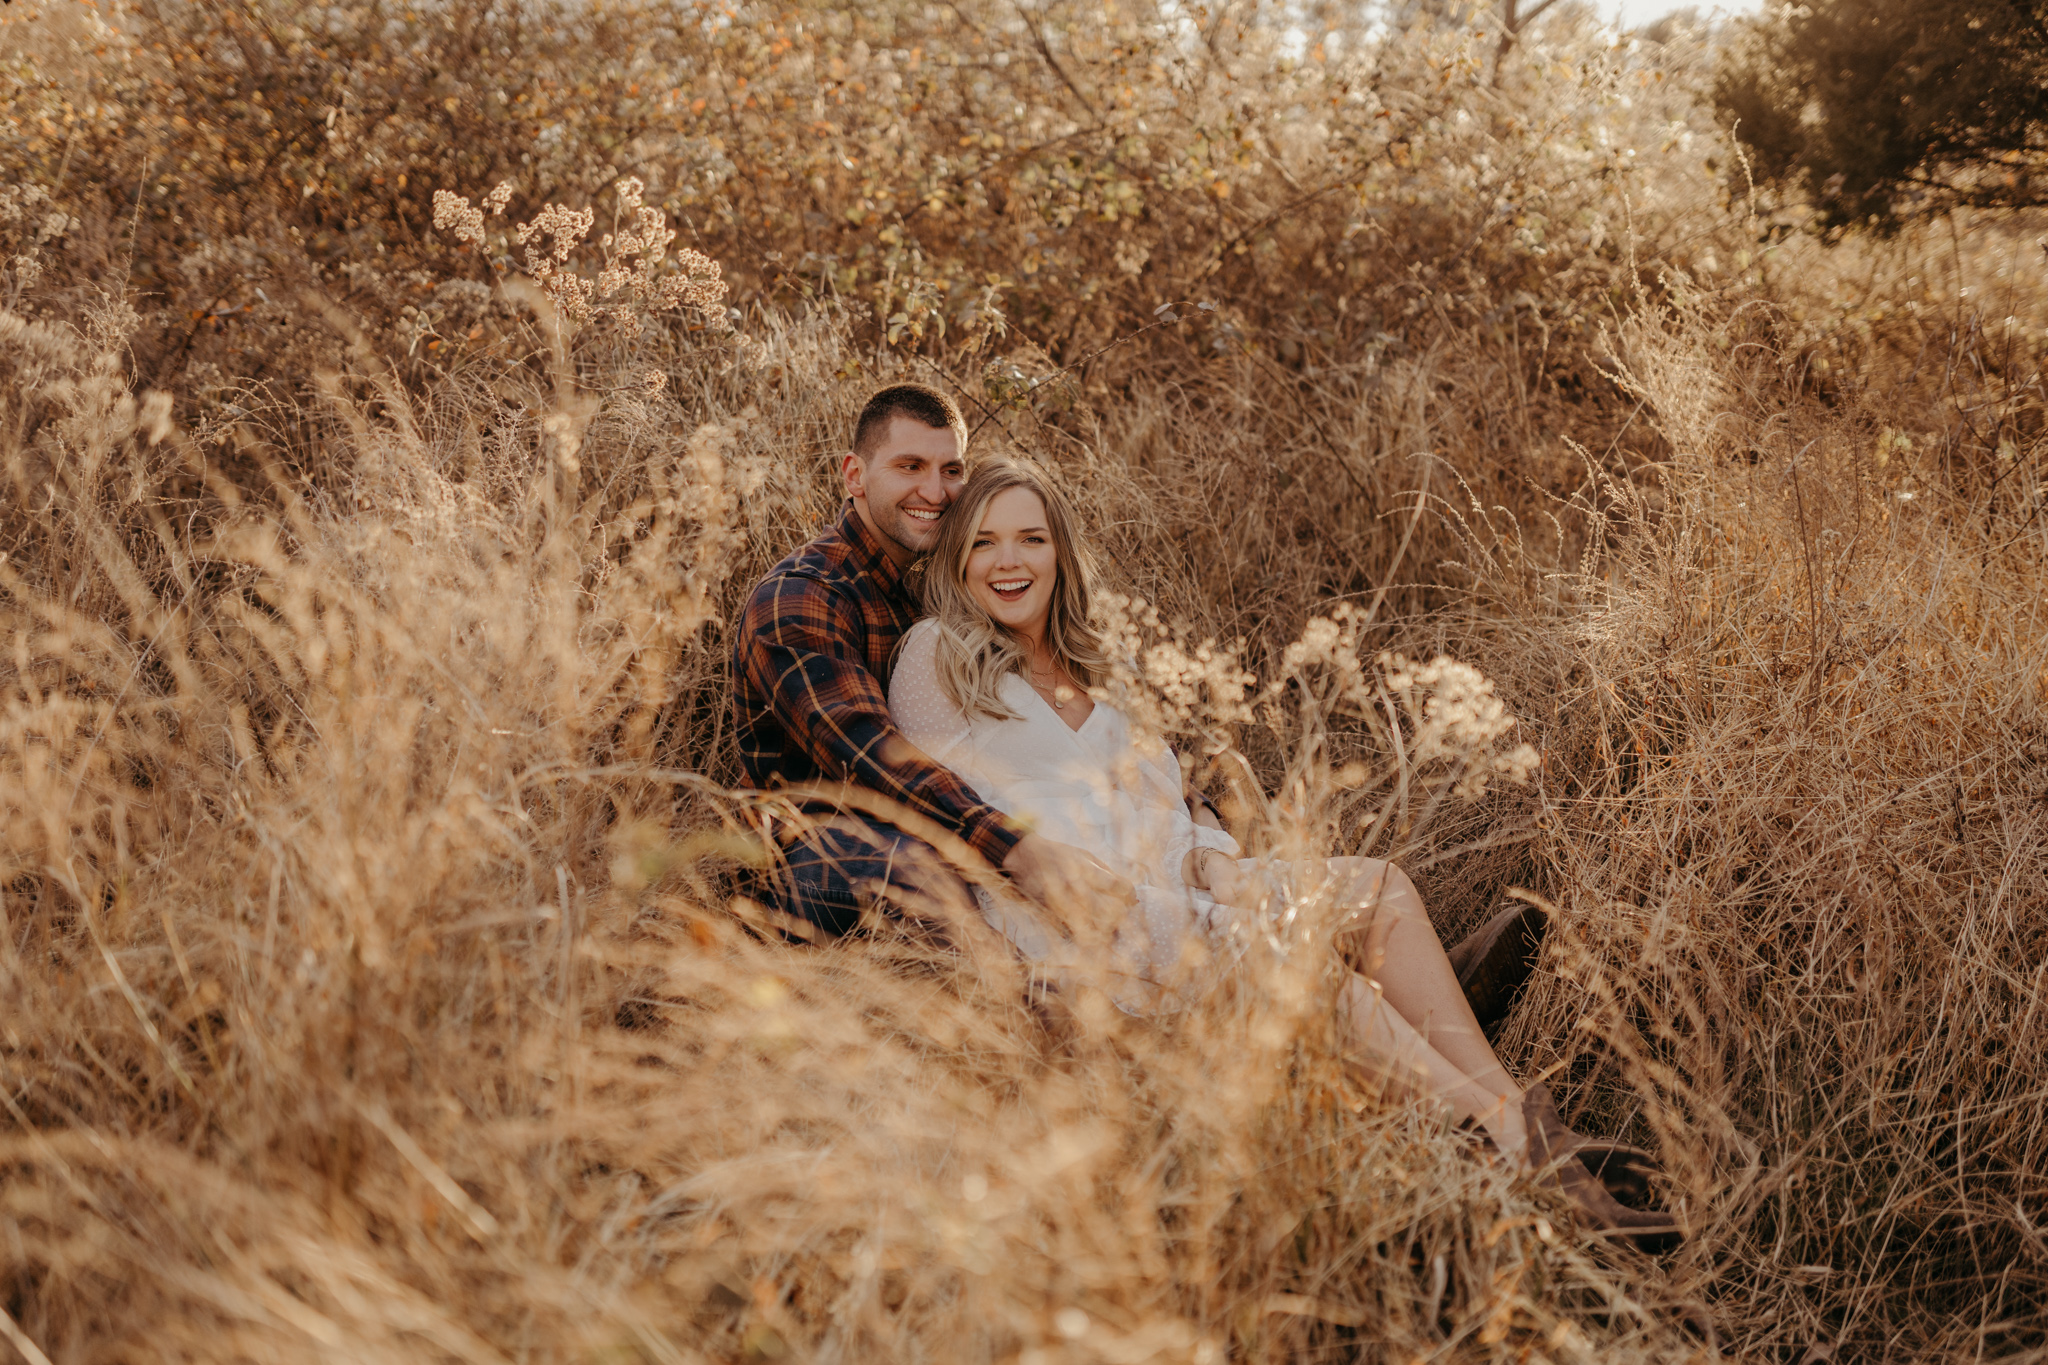 Golden Hour Engagement Session in a Grassy Field, Maryland Adventure Photographer